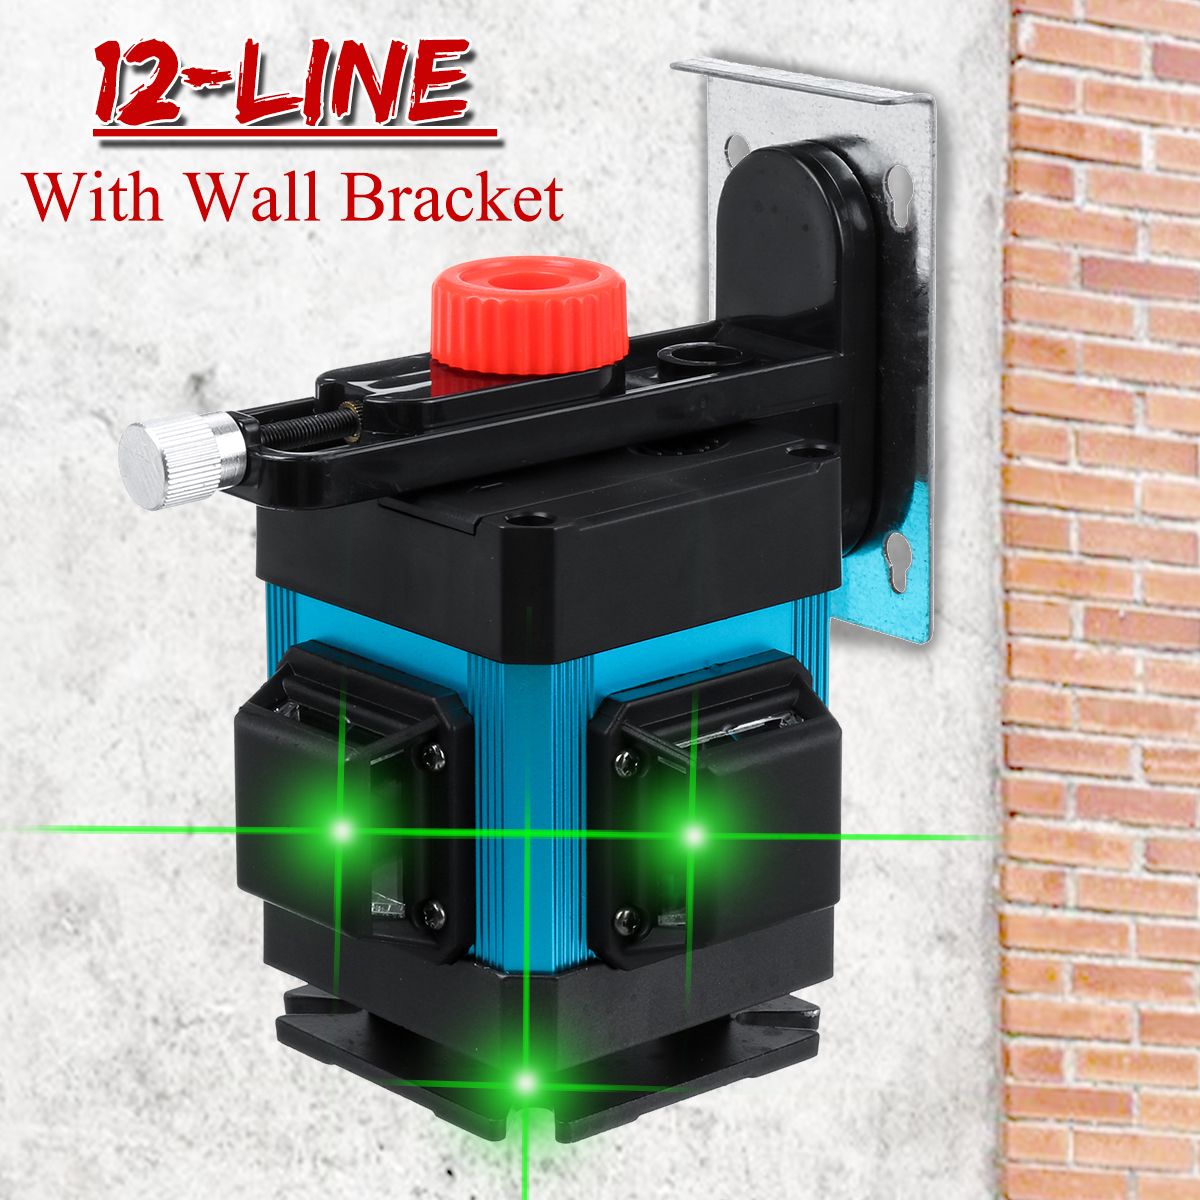 12-Line-Self-Leveling-Laser-Level-Measure-Tool-Wall-Lift-Bracket-Remote-Control-1530119